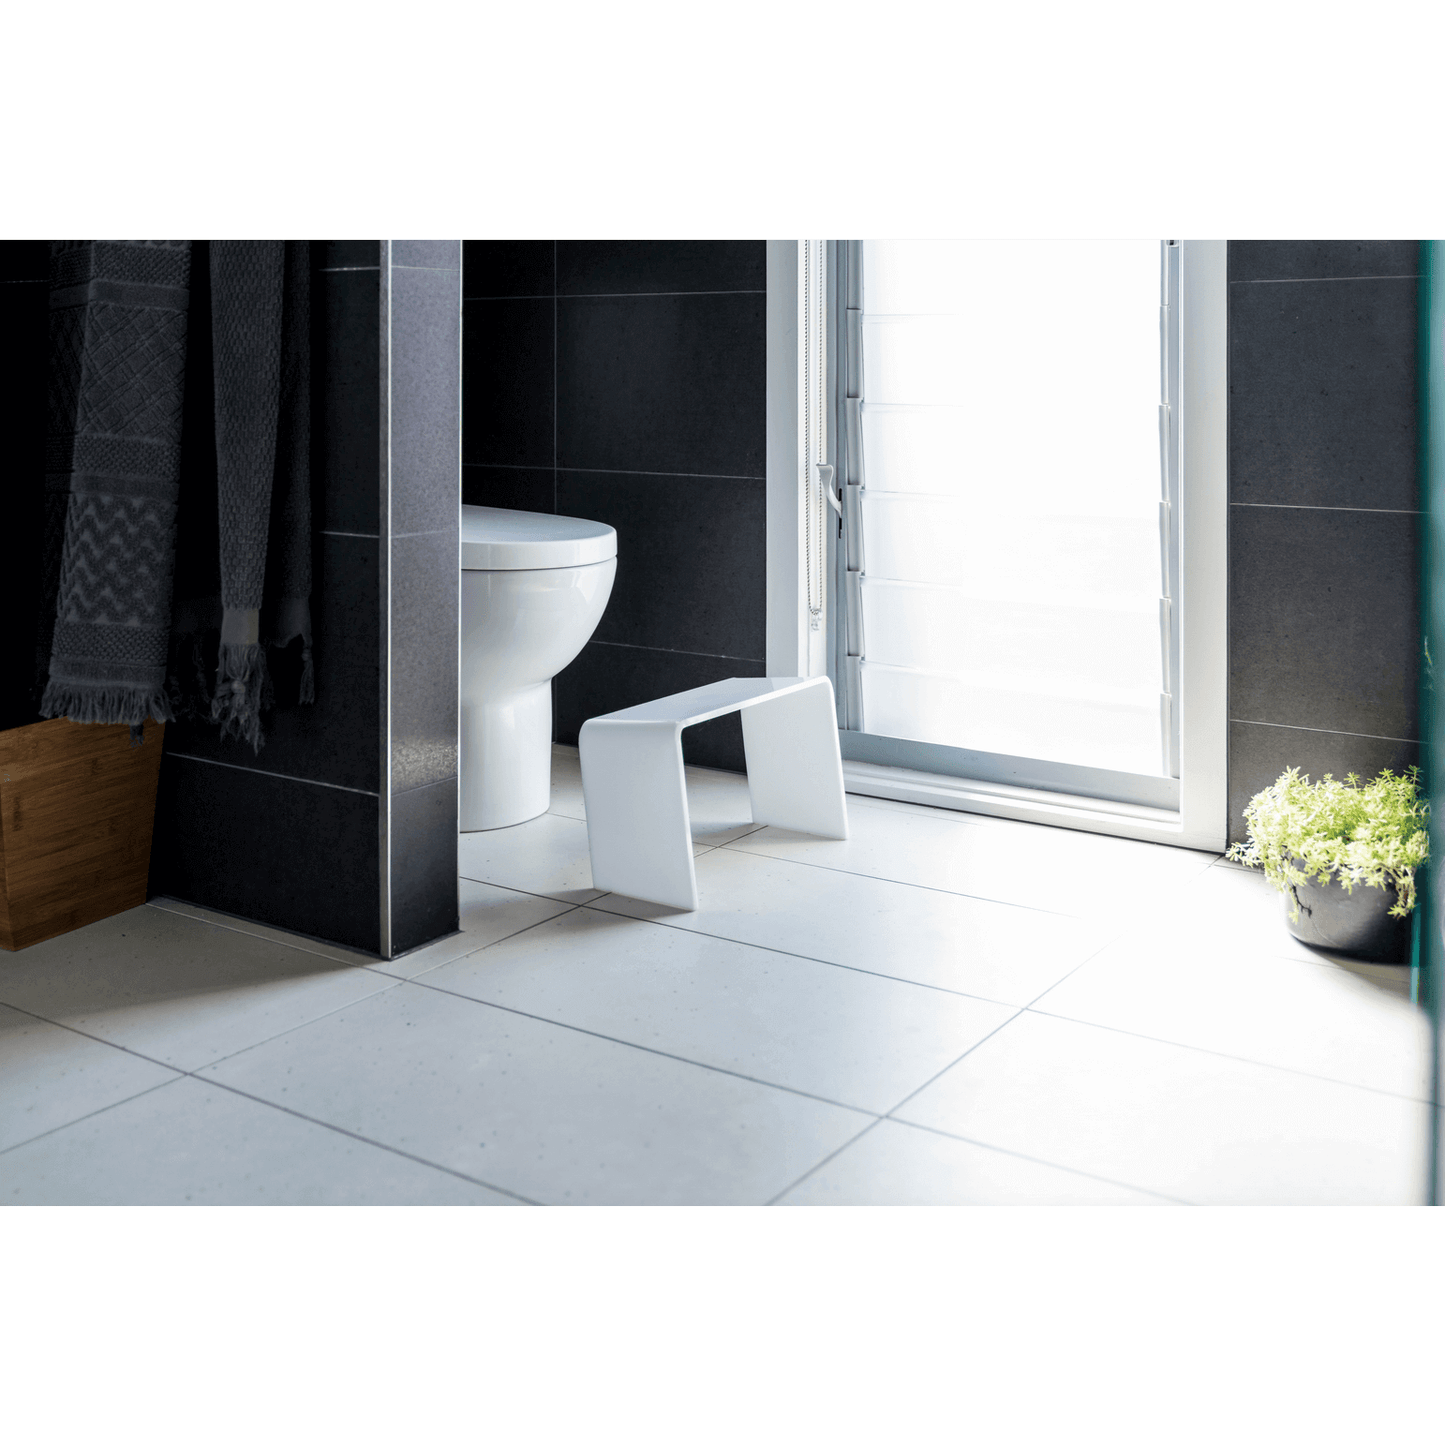 The PROPPR Acer - White Toilet Foot Stool - side angled view in a bathroom